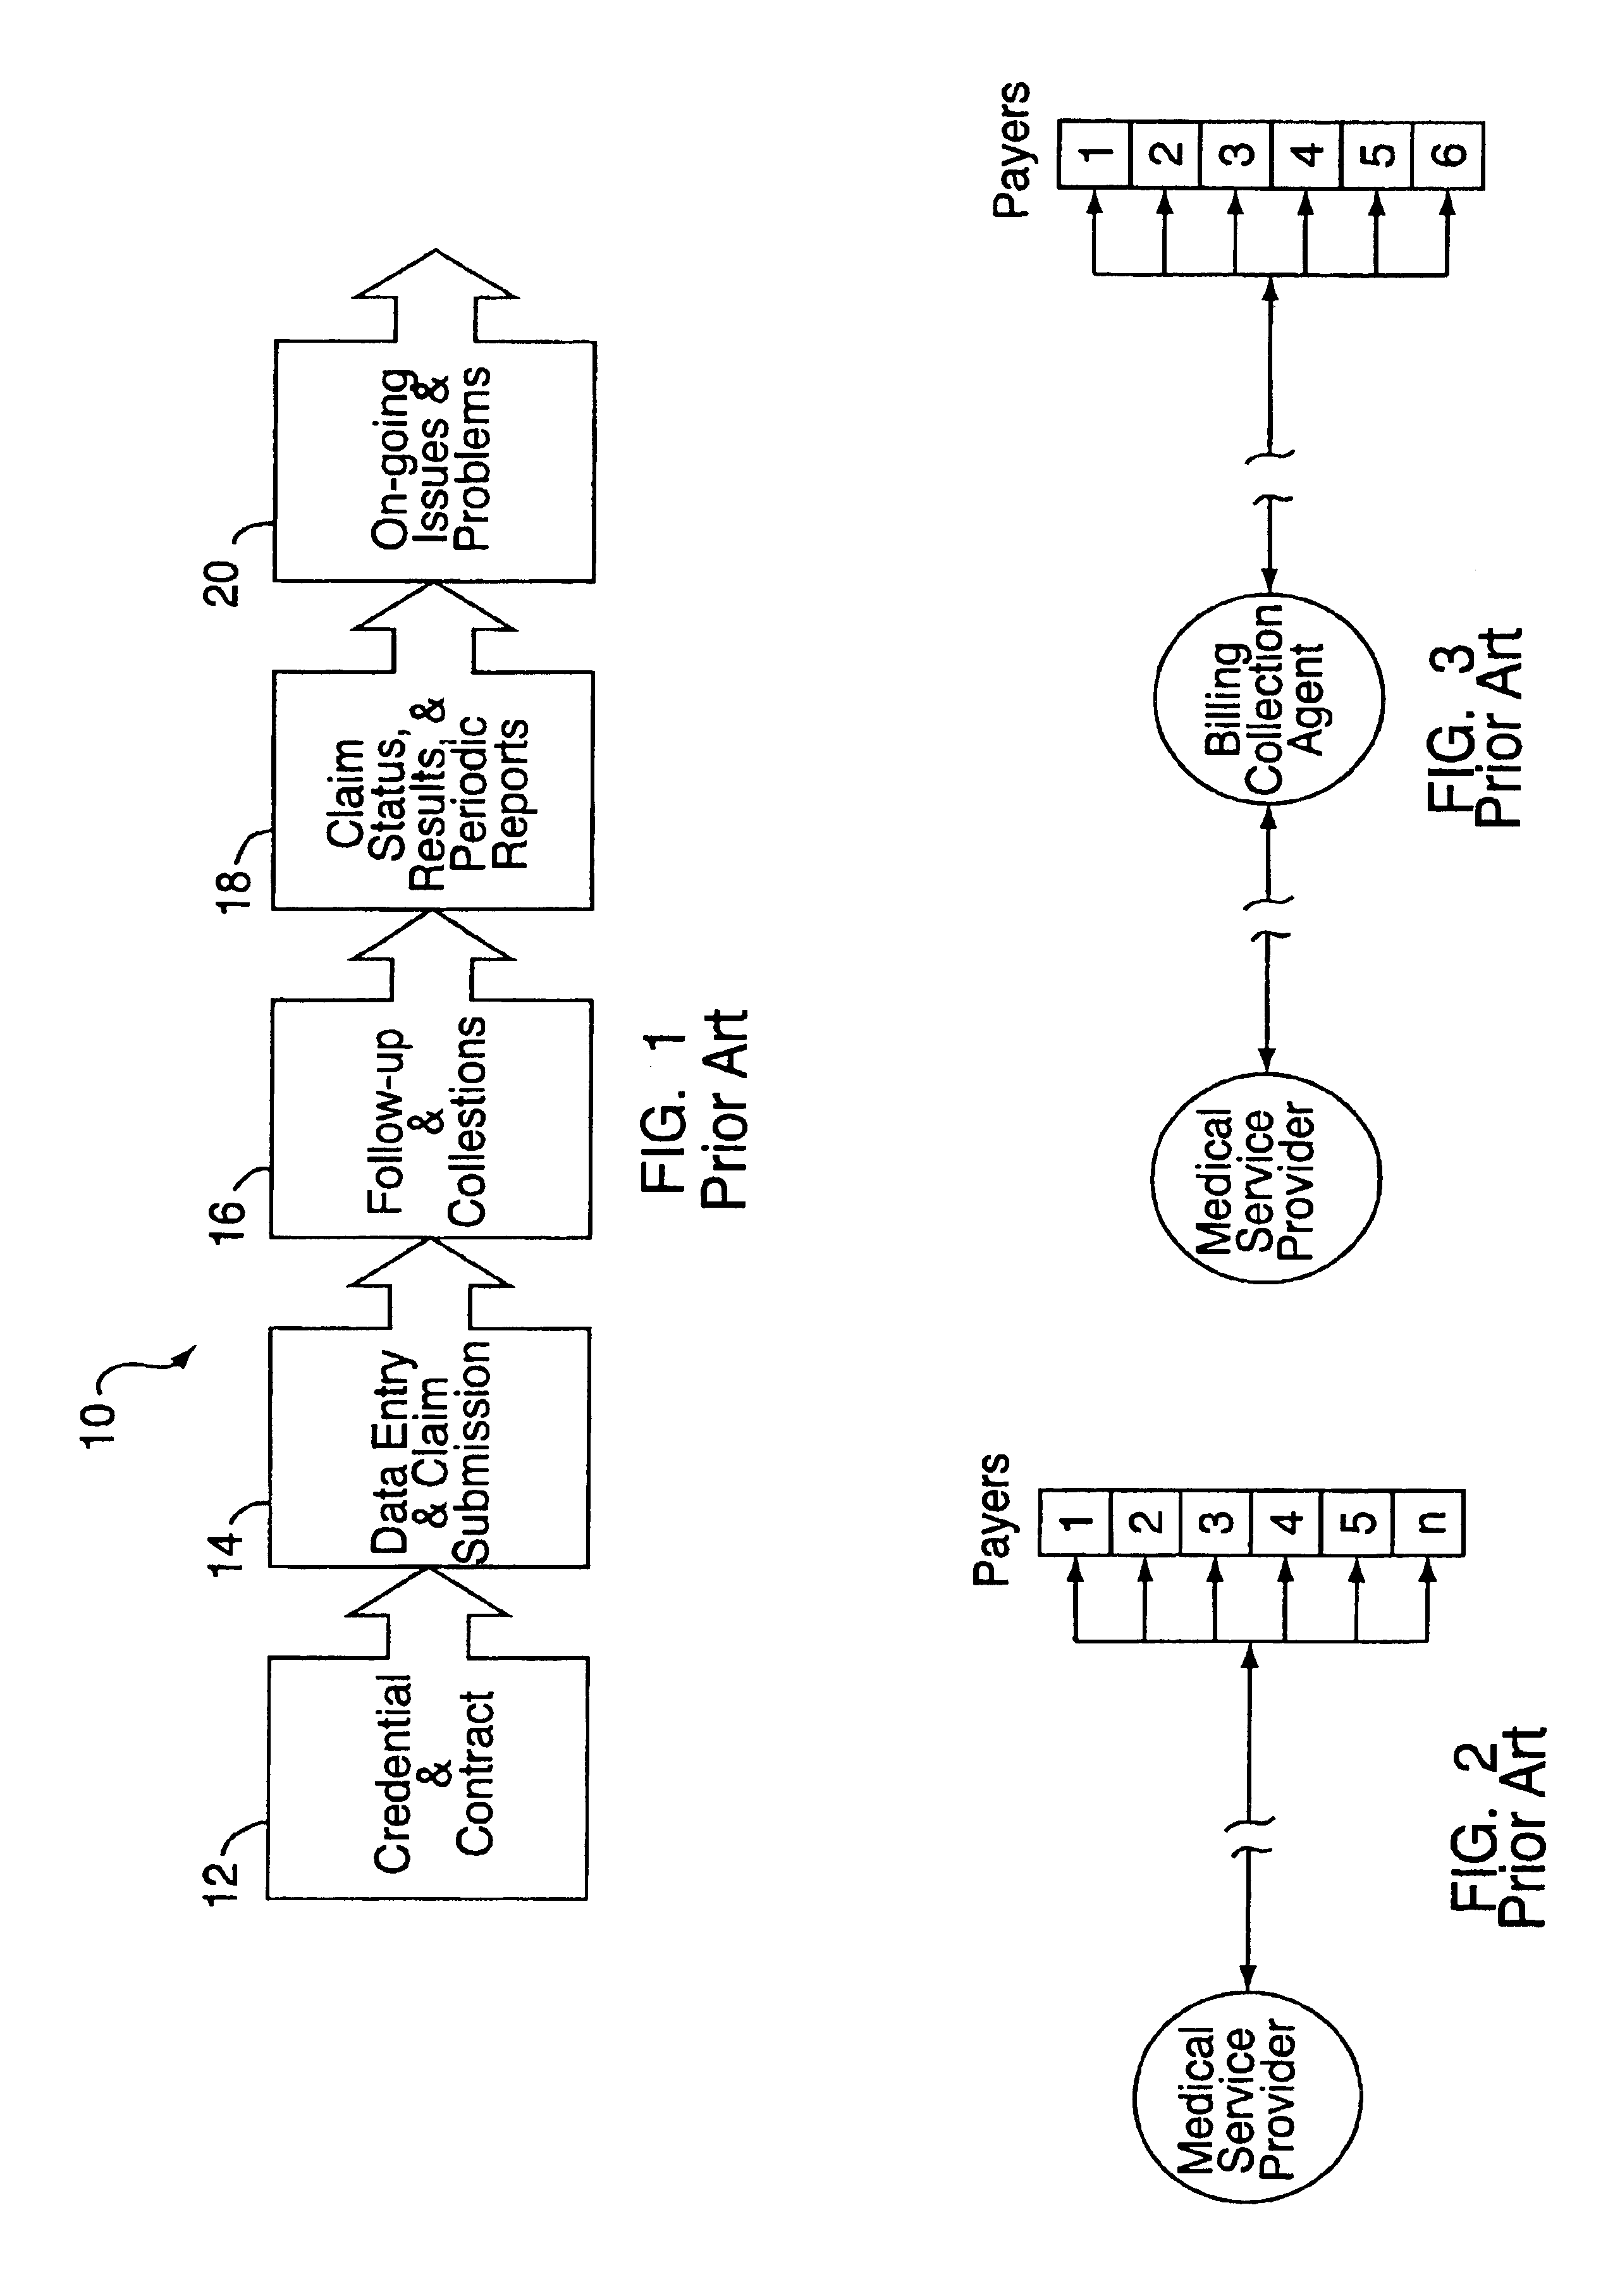 Method and system for providing evaluation data from tracked, formatted administrative data of a service provider